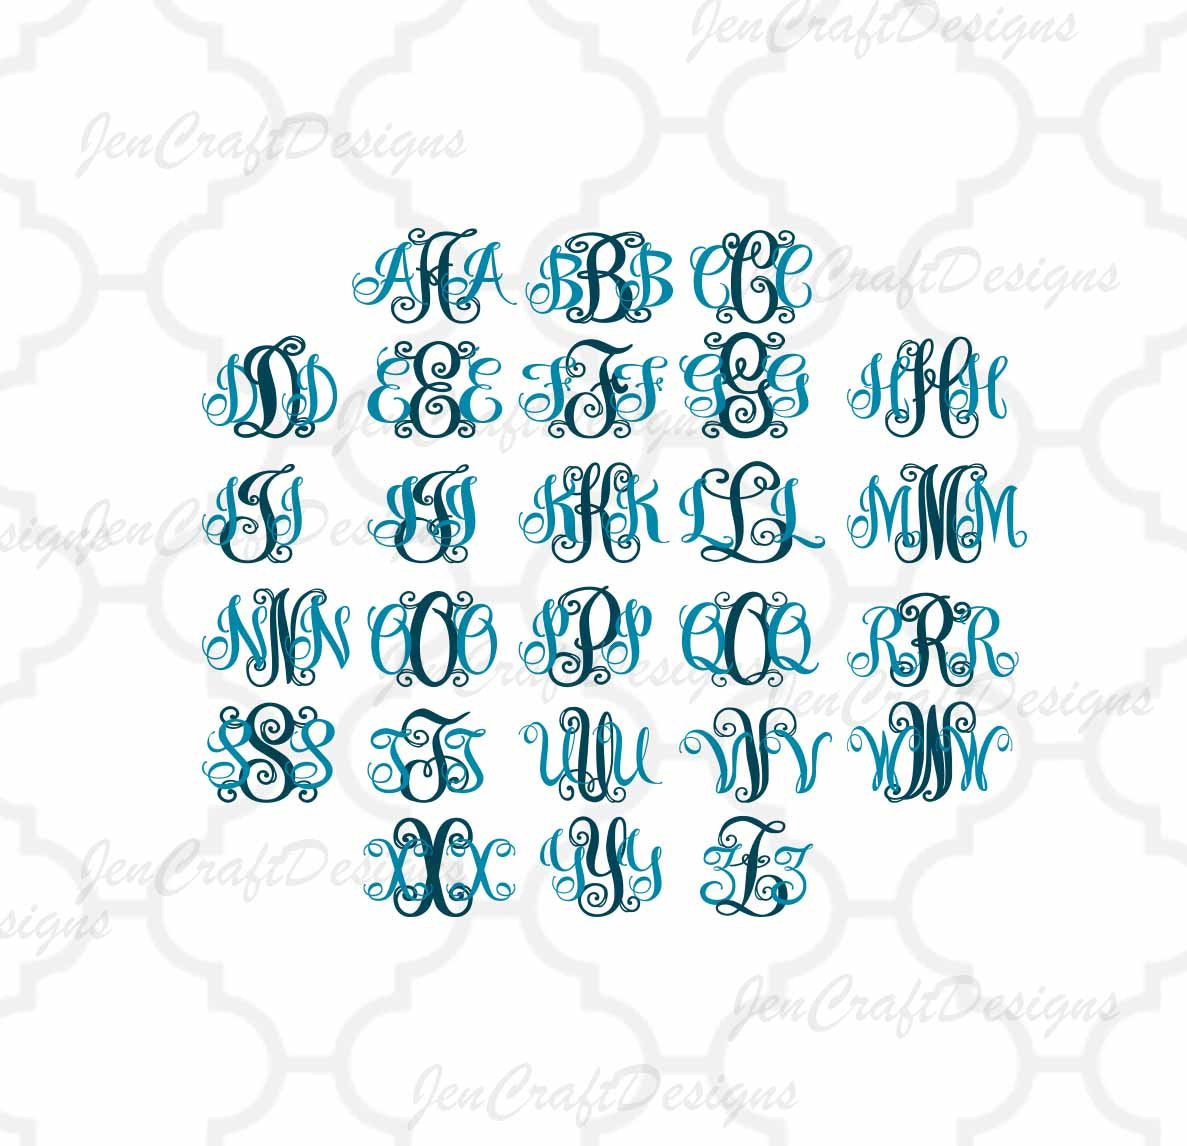 Curly Locking Monogram AlphaBet SVG, EPS, DXF and PNG - JenCraft Designs